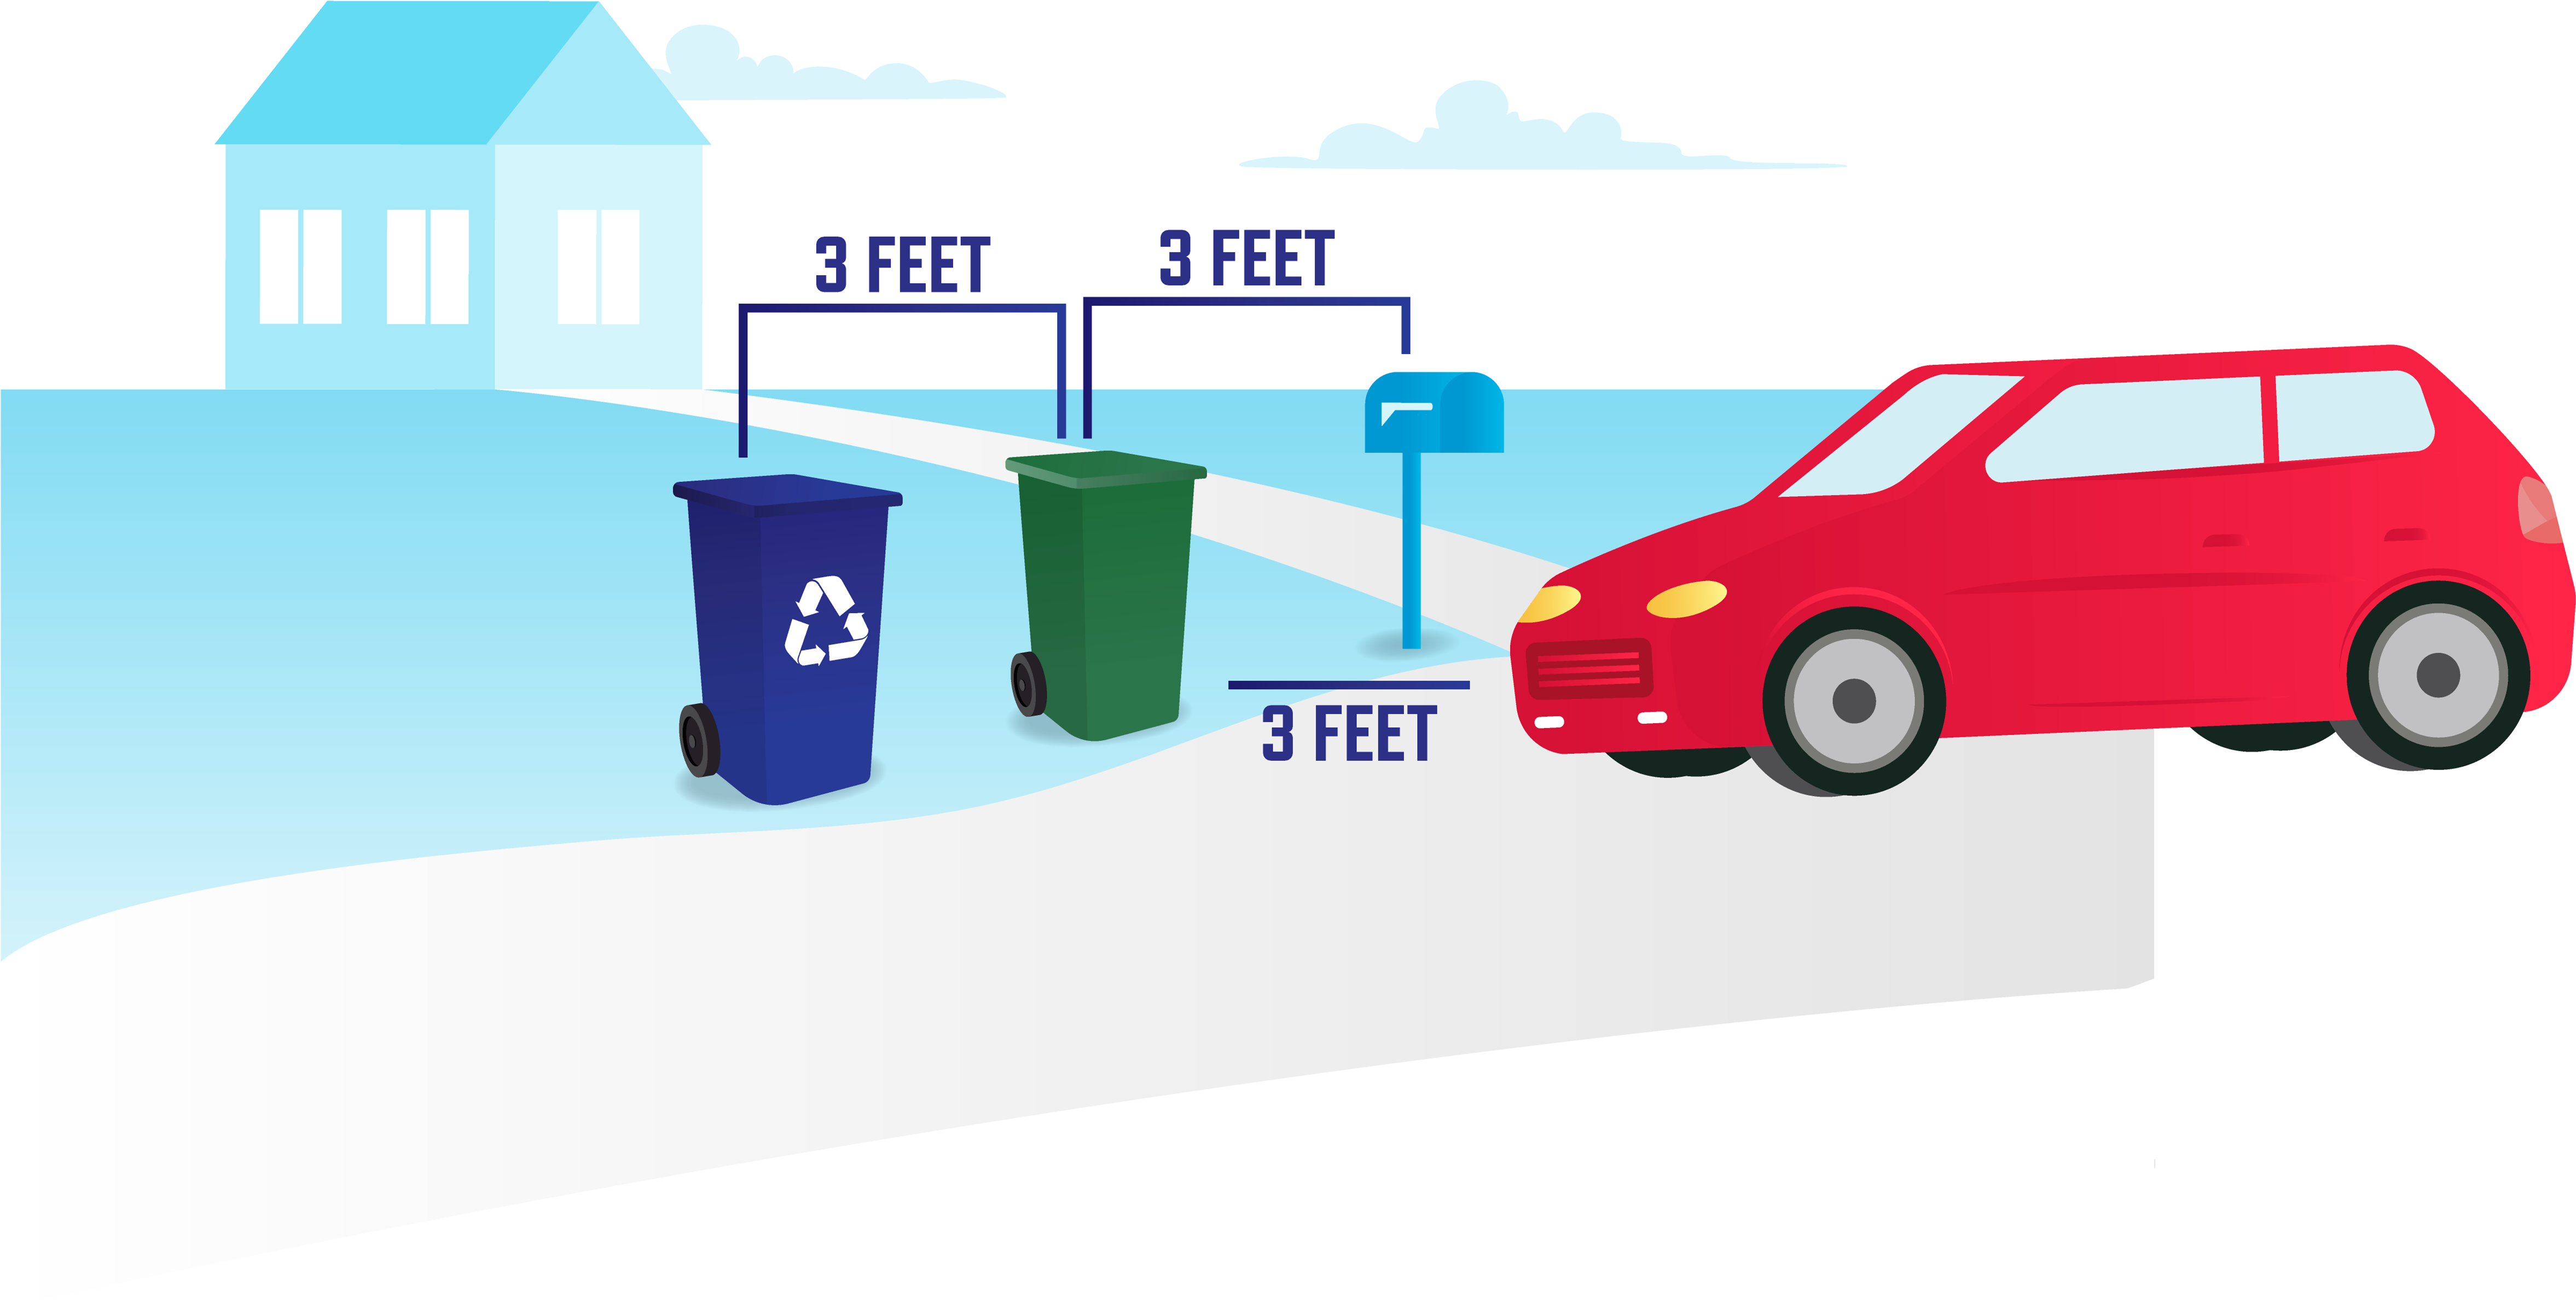 graphic depicting solid waste/recycling containers and 3 feet of space between them and other nearby objects